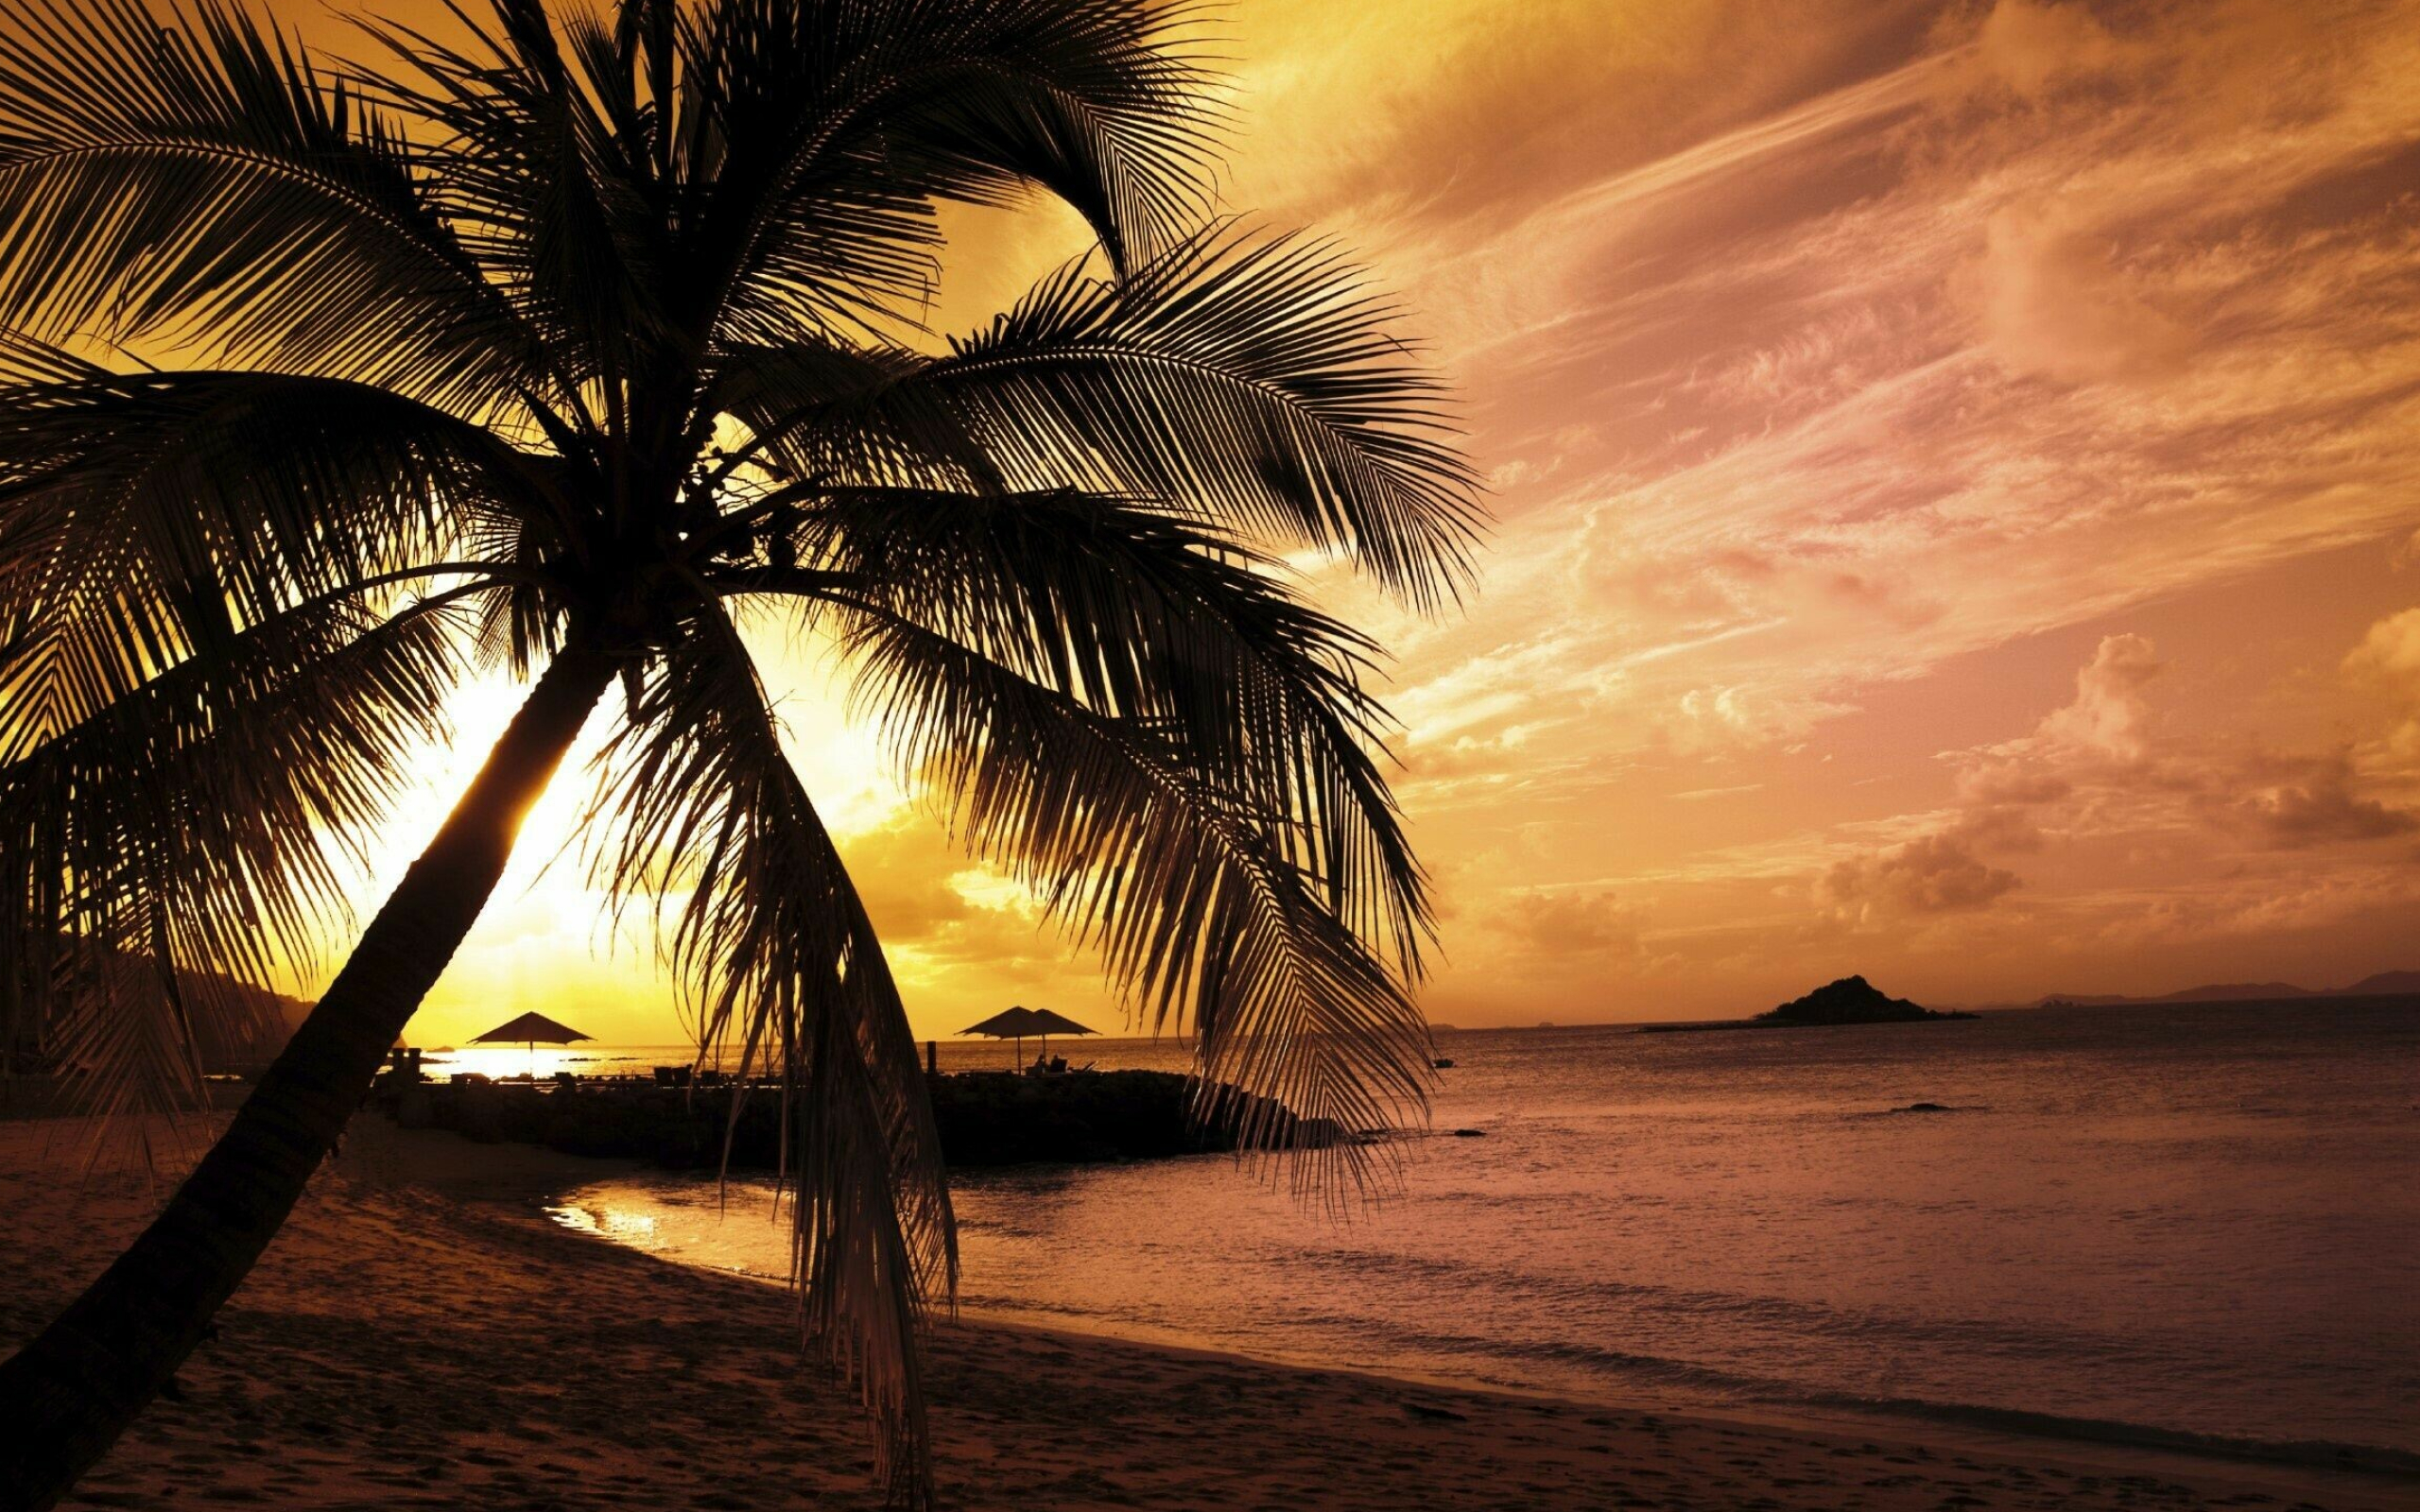 Sunset: The time of day when the sun disappears, Beach. 2560x1600 HD Wallpaper.